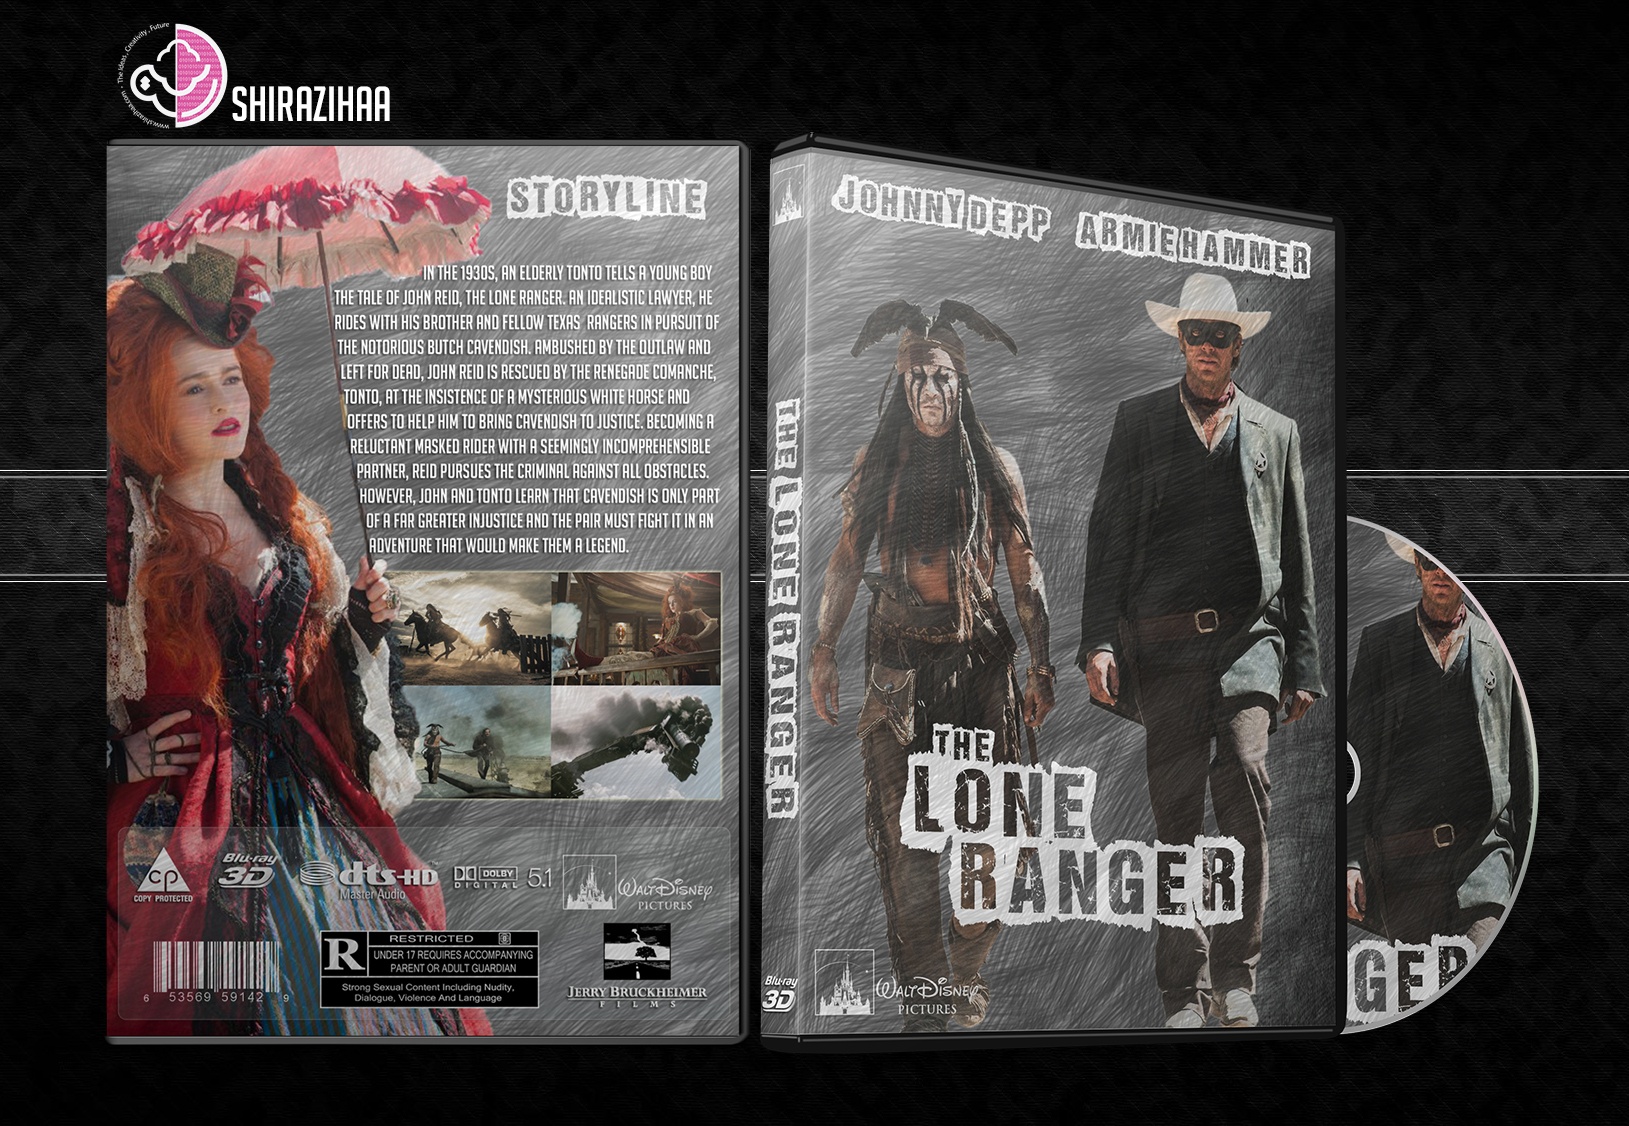 The Lone Ranger box cover